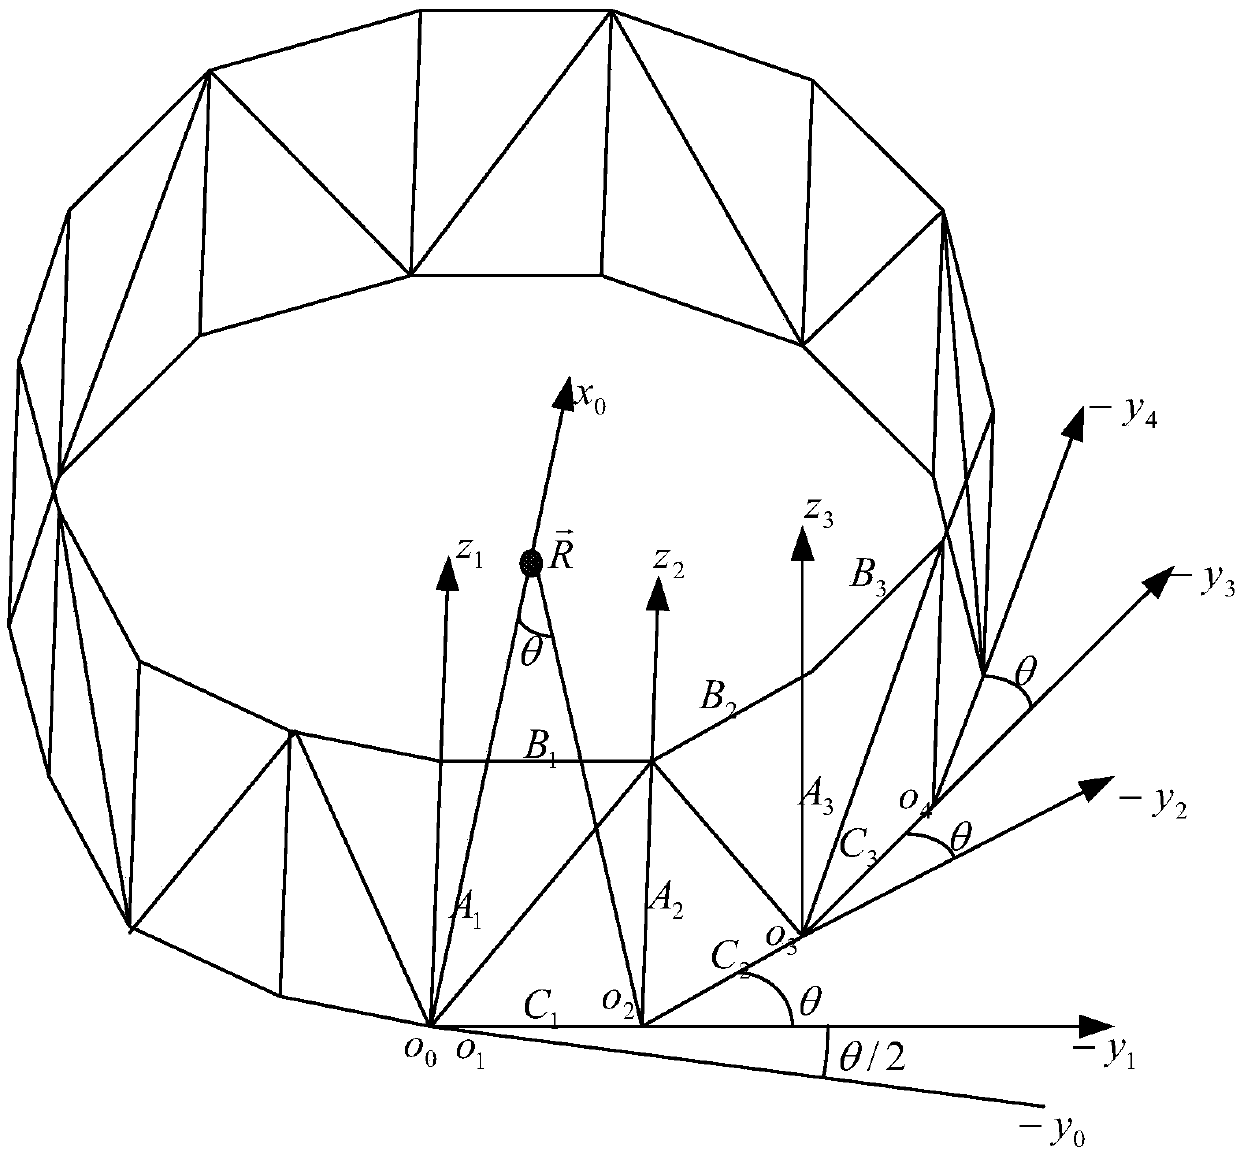 A method and a system for modeling equivalent satellite attitude motion of vertical rods in the deployment process of a loop antenna